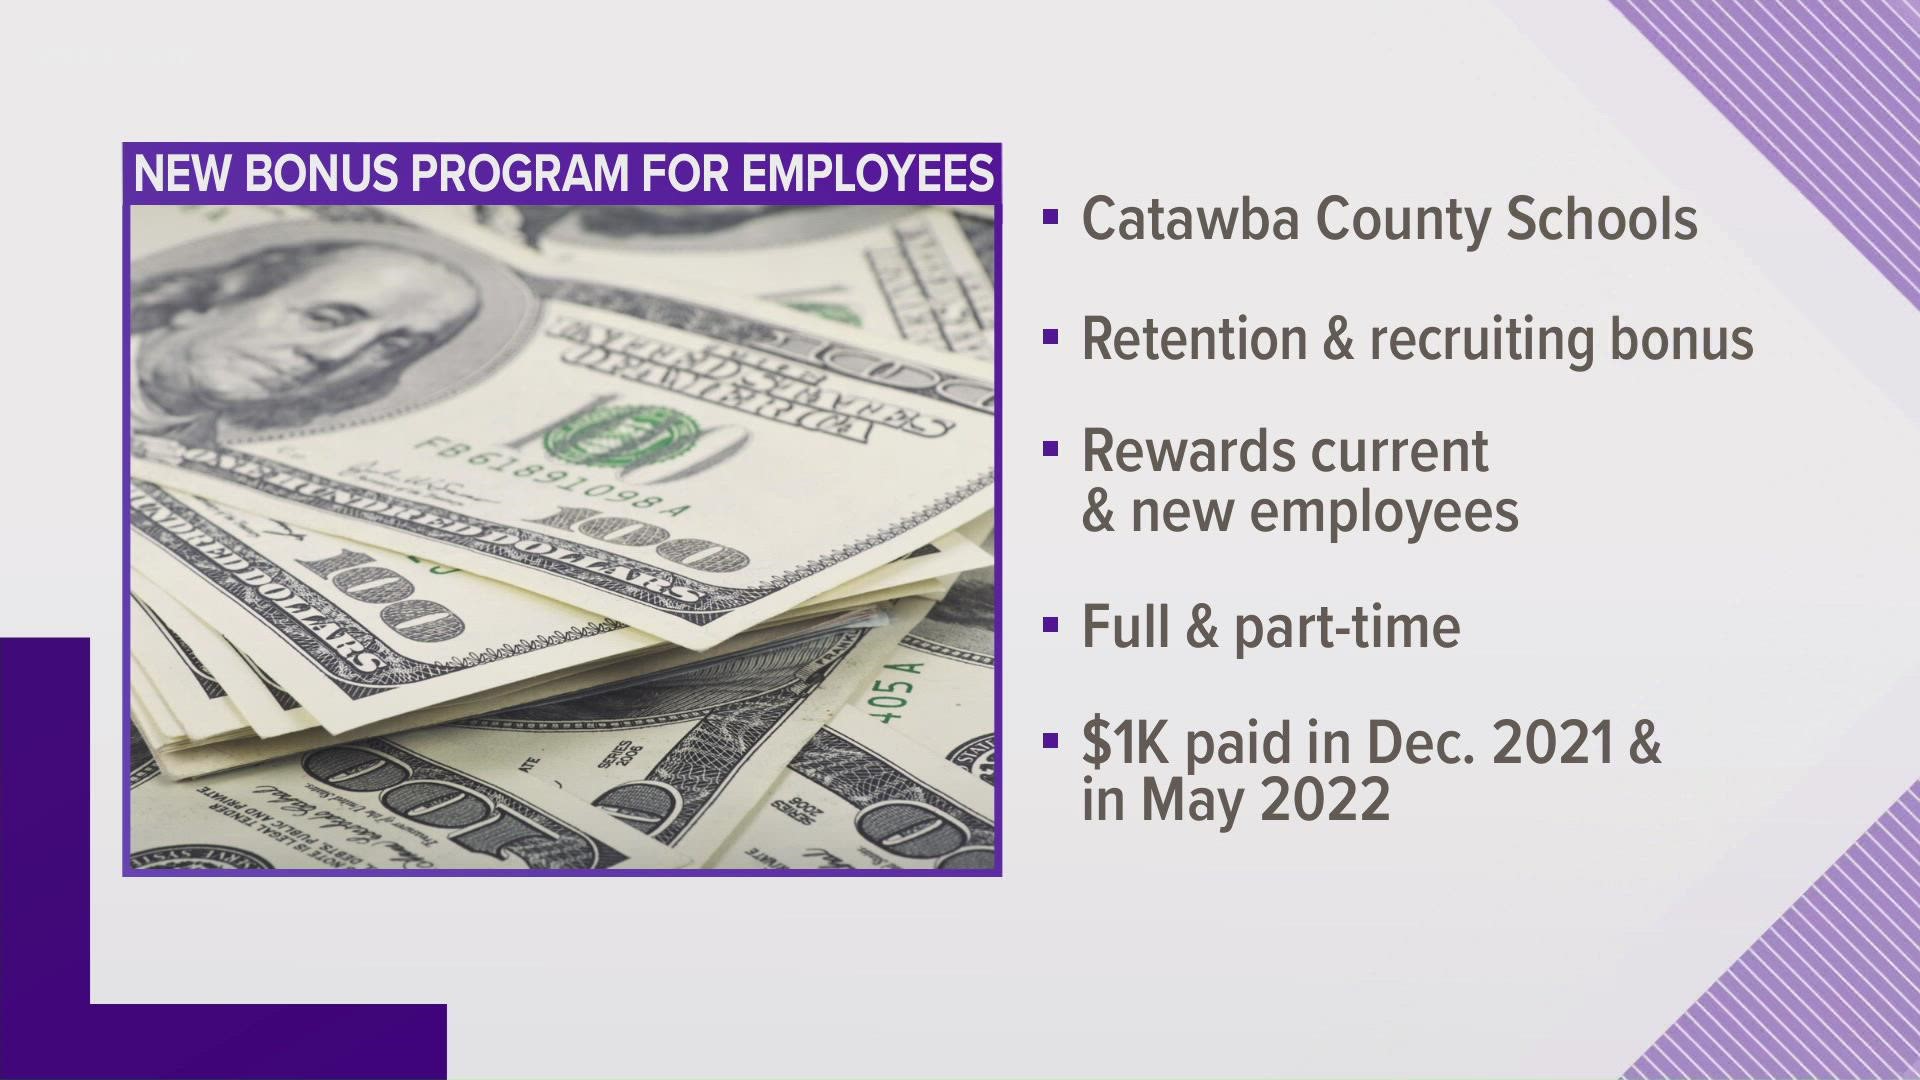 Schools in Catawba County are rolling out a new retention and recruiting bonus program aimed at rewarding current and new employees for extra duties due to COVID-19.